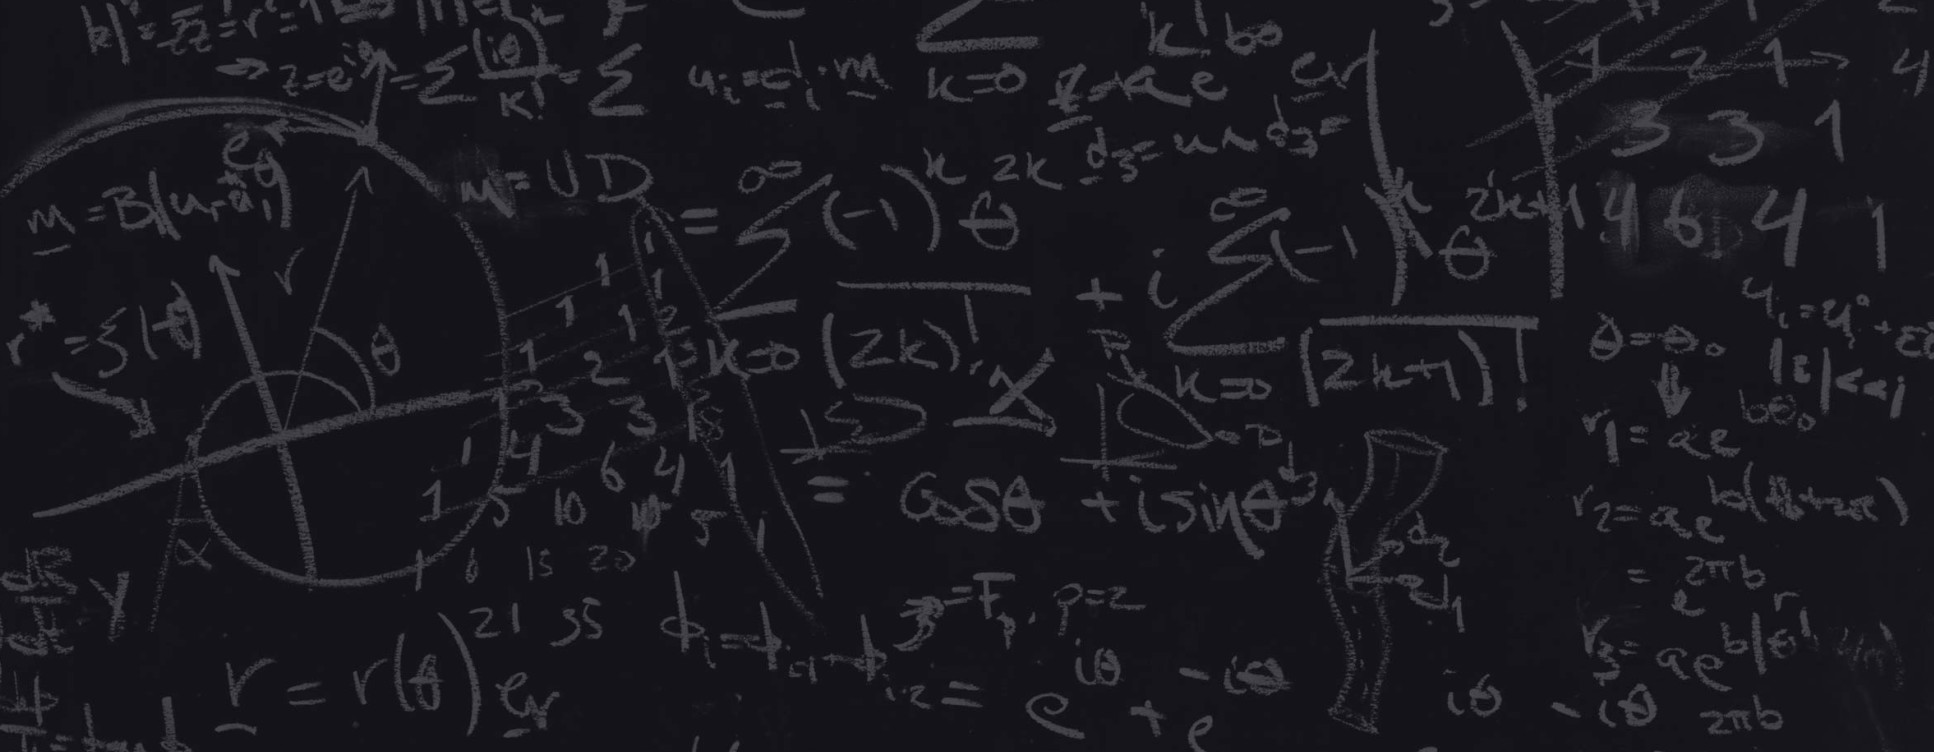 blackboard with mathematical equations